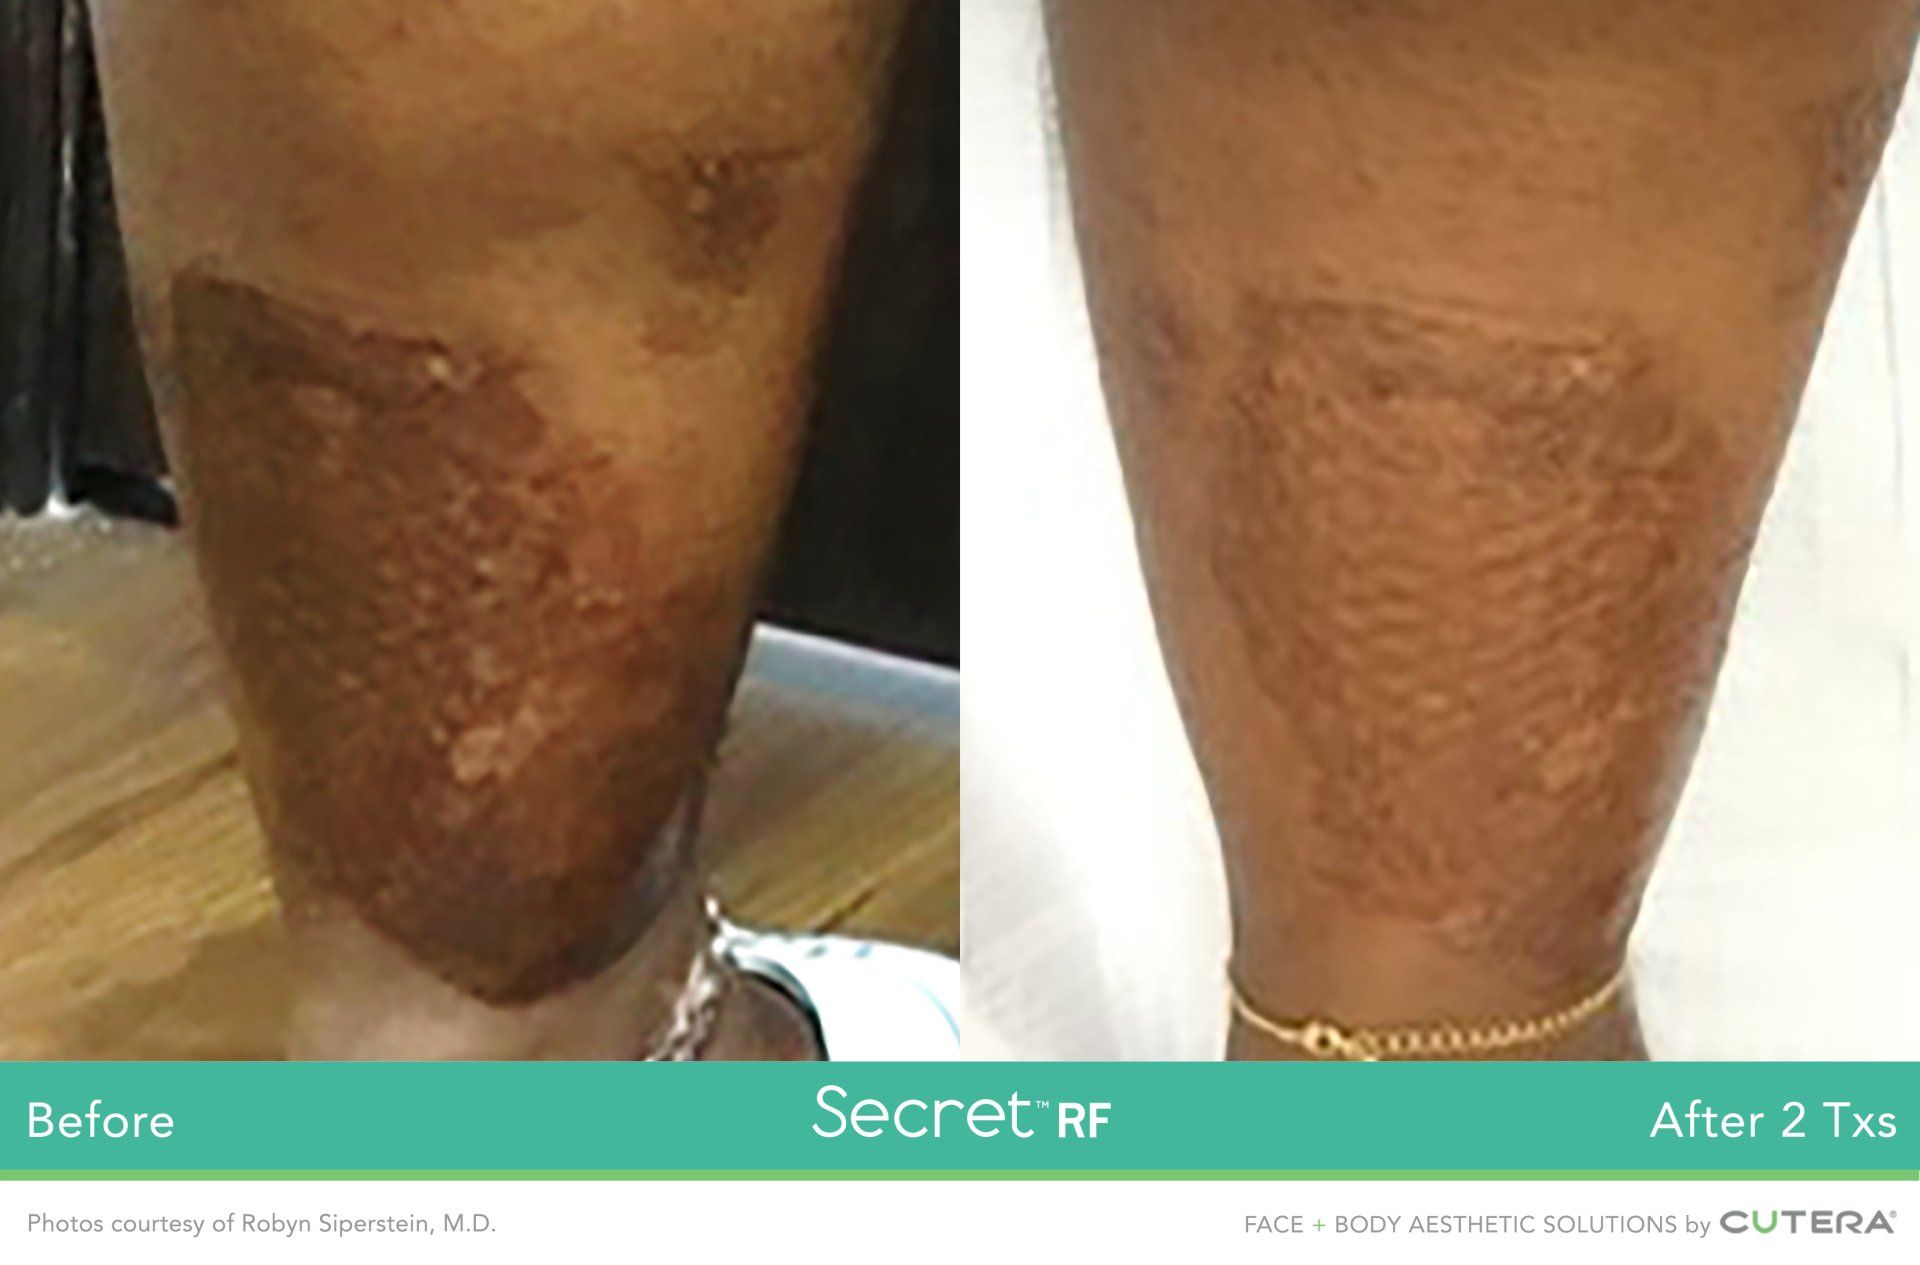 A before and after photo of a person 's leg.